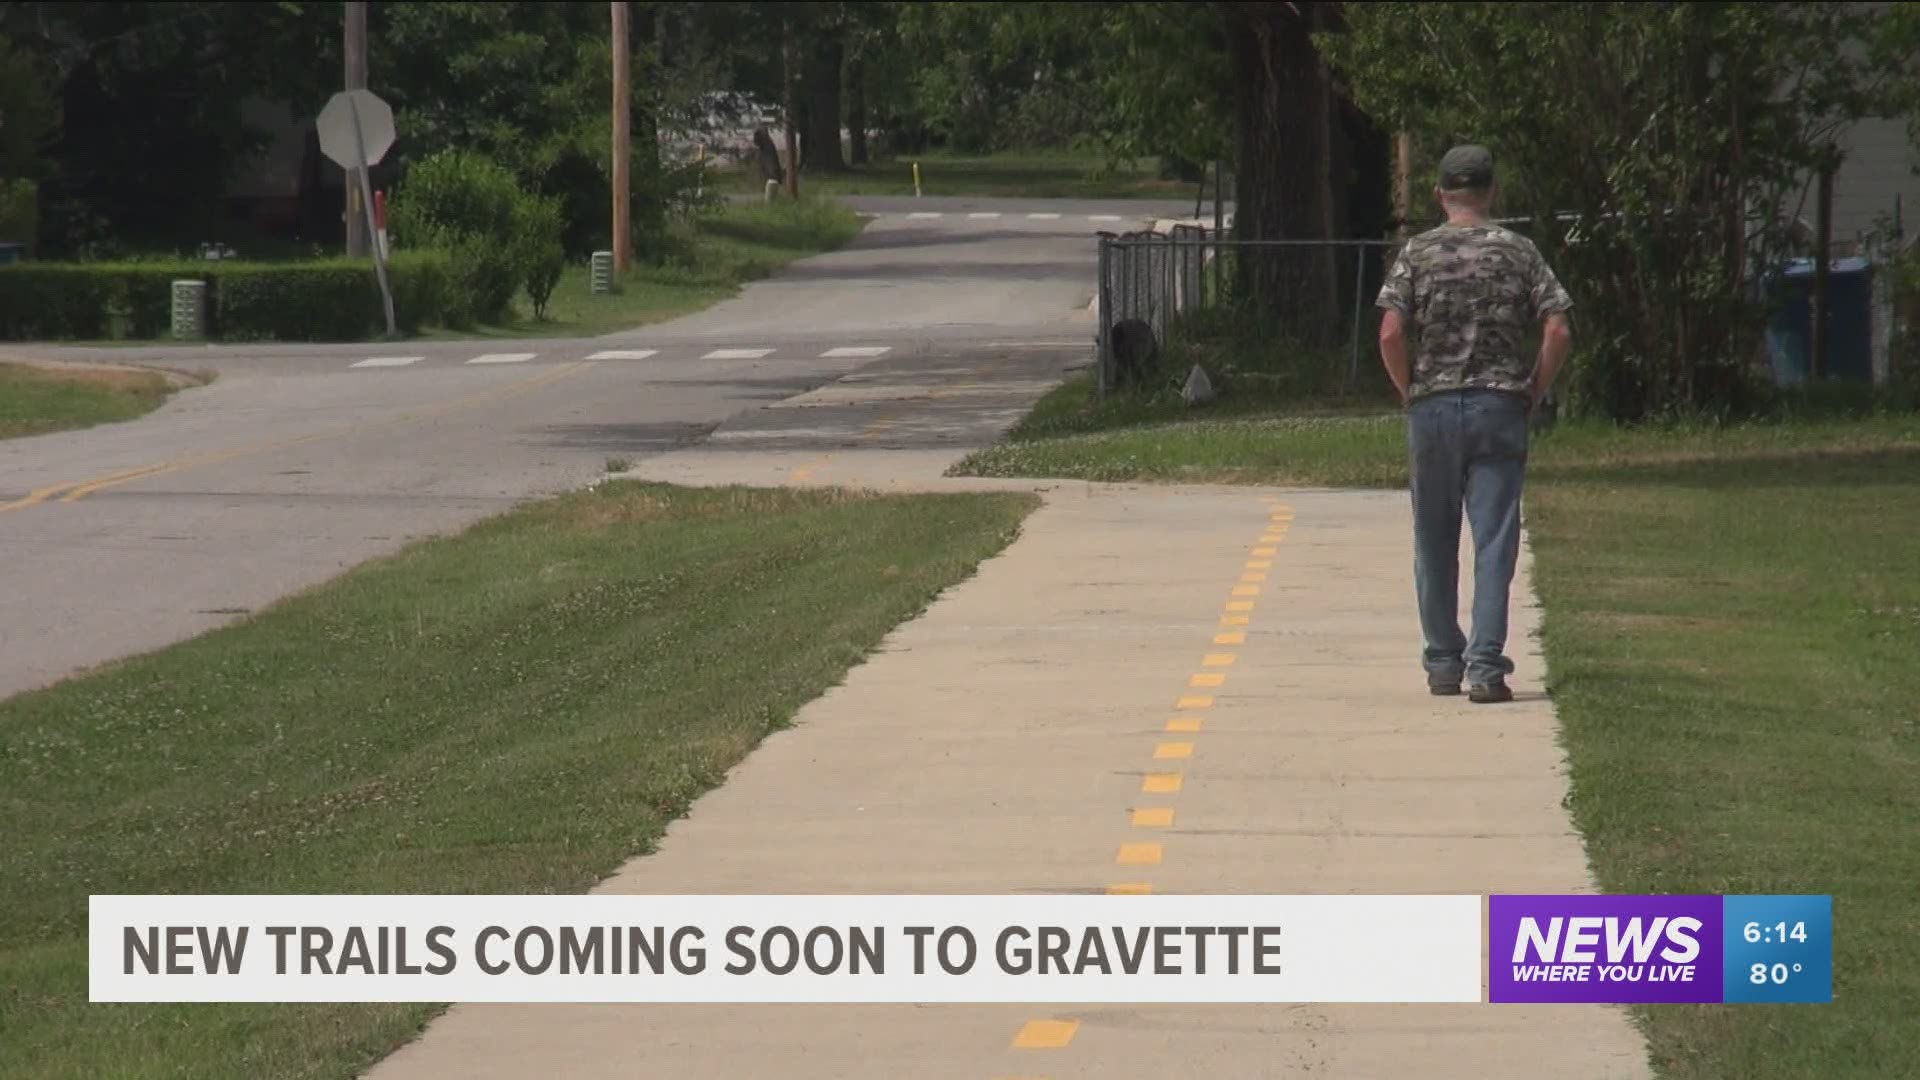 New trails coming soon to Gravette.